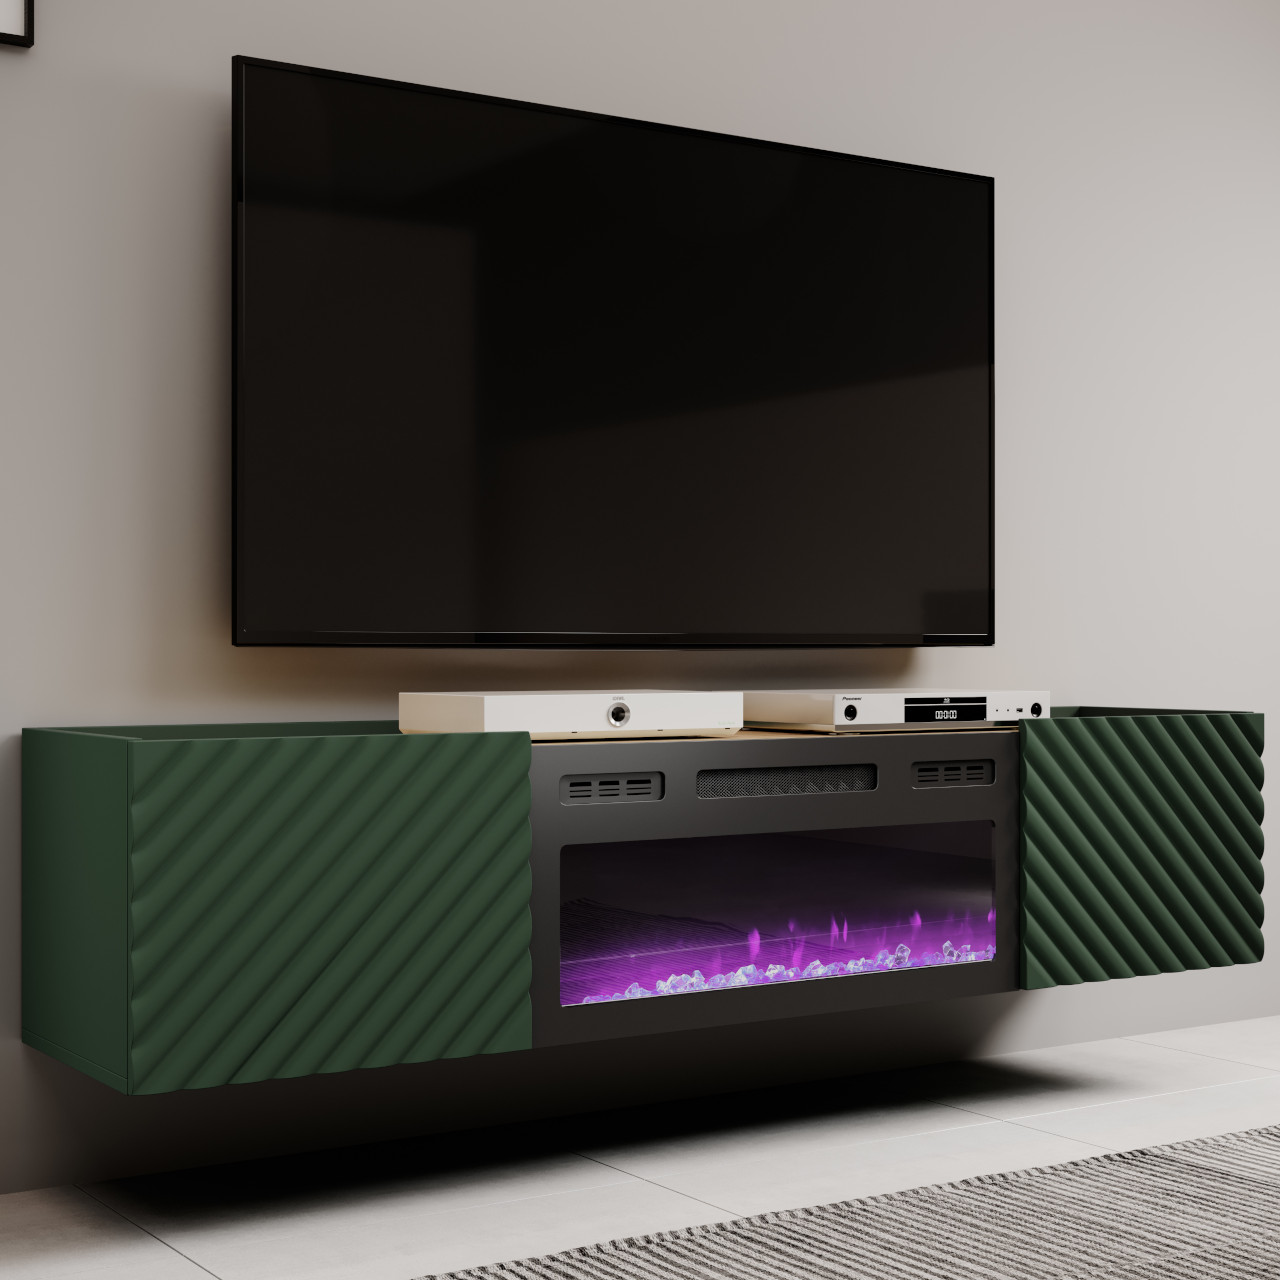 TV cabinet with electric fireplace INDA EF green / artisan oak